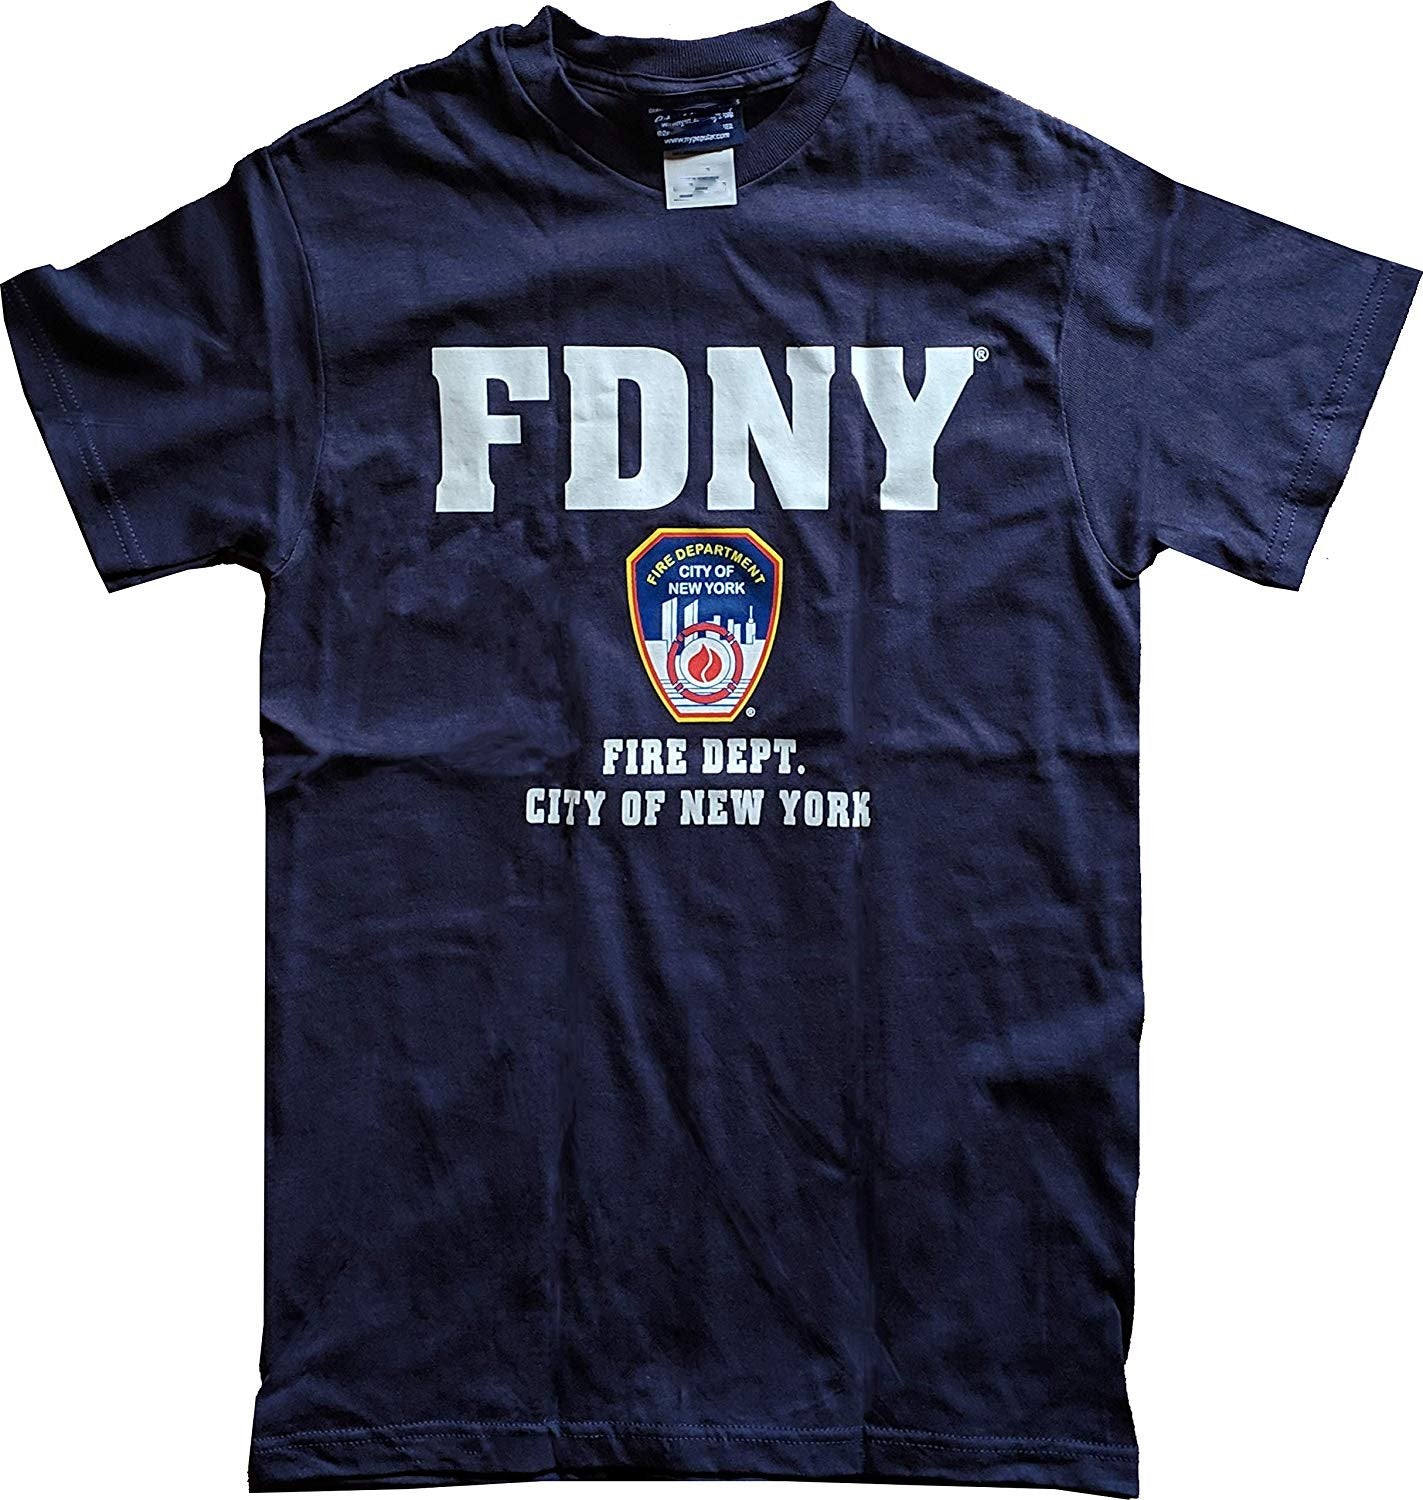 FDNY Youth Tee Officially Licensed Kids T-Shirt (Navy Blue)